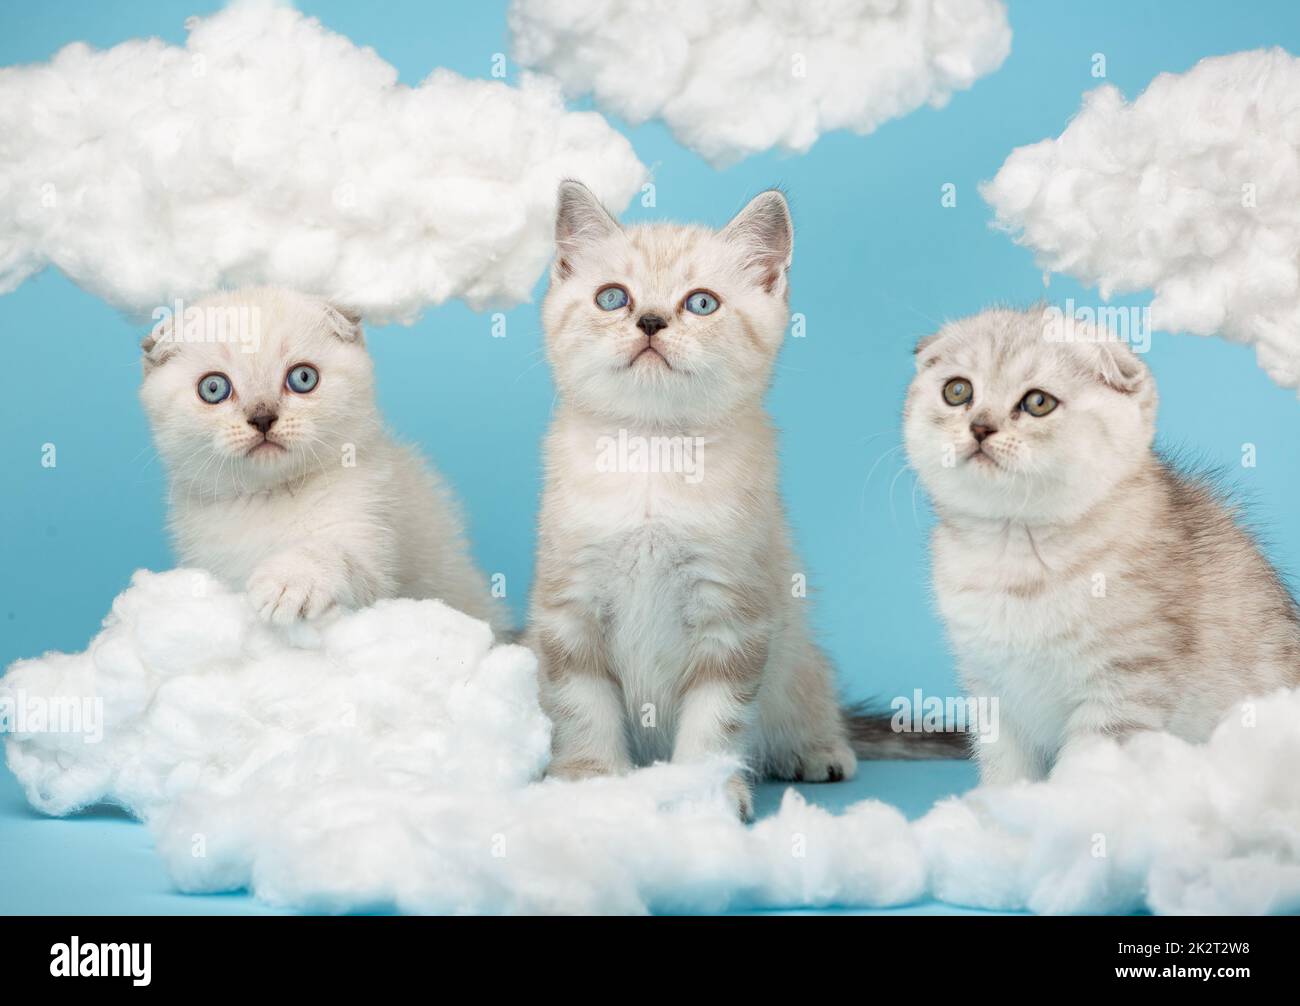 Portrait of three Scottish kittens with interest looking at cotton clouds on a blue background. Stock Photo